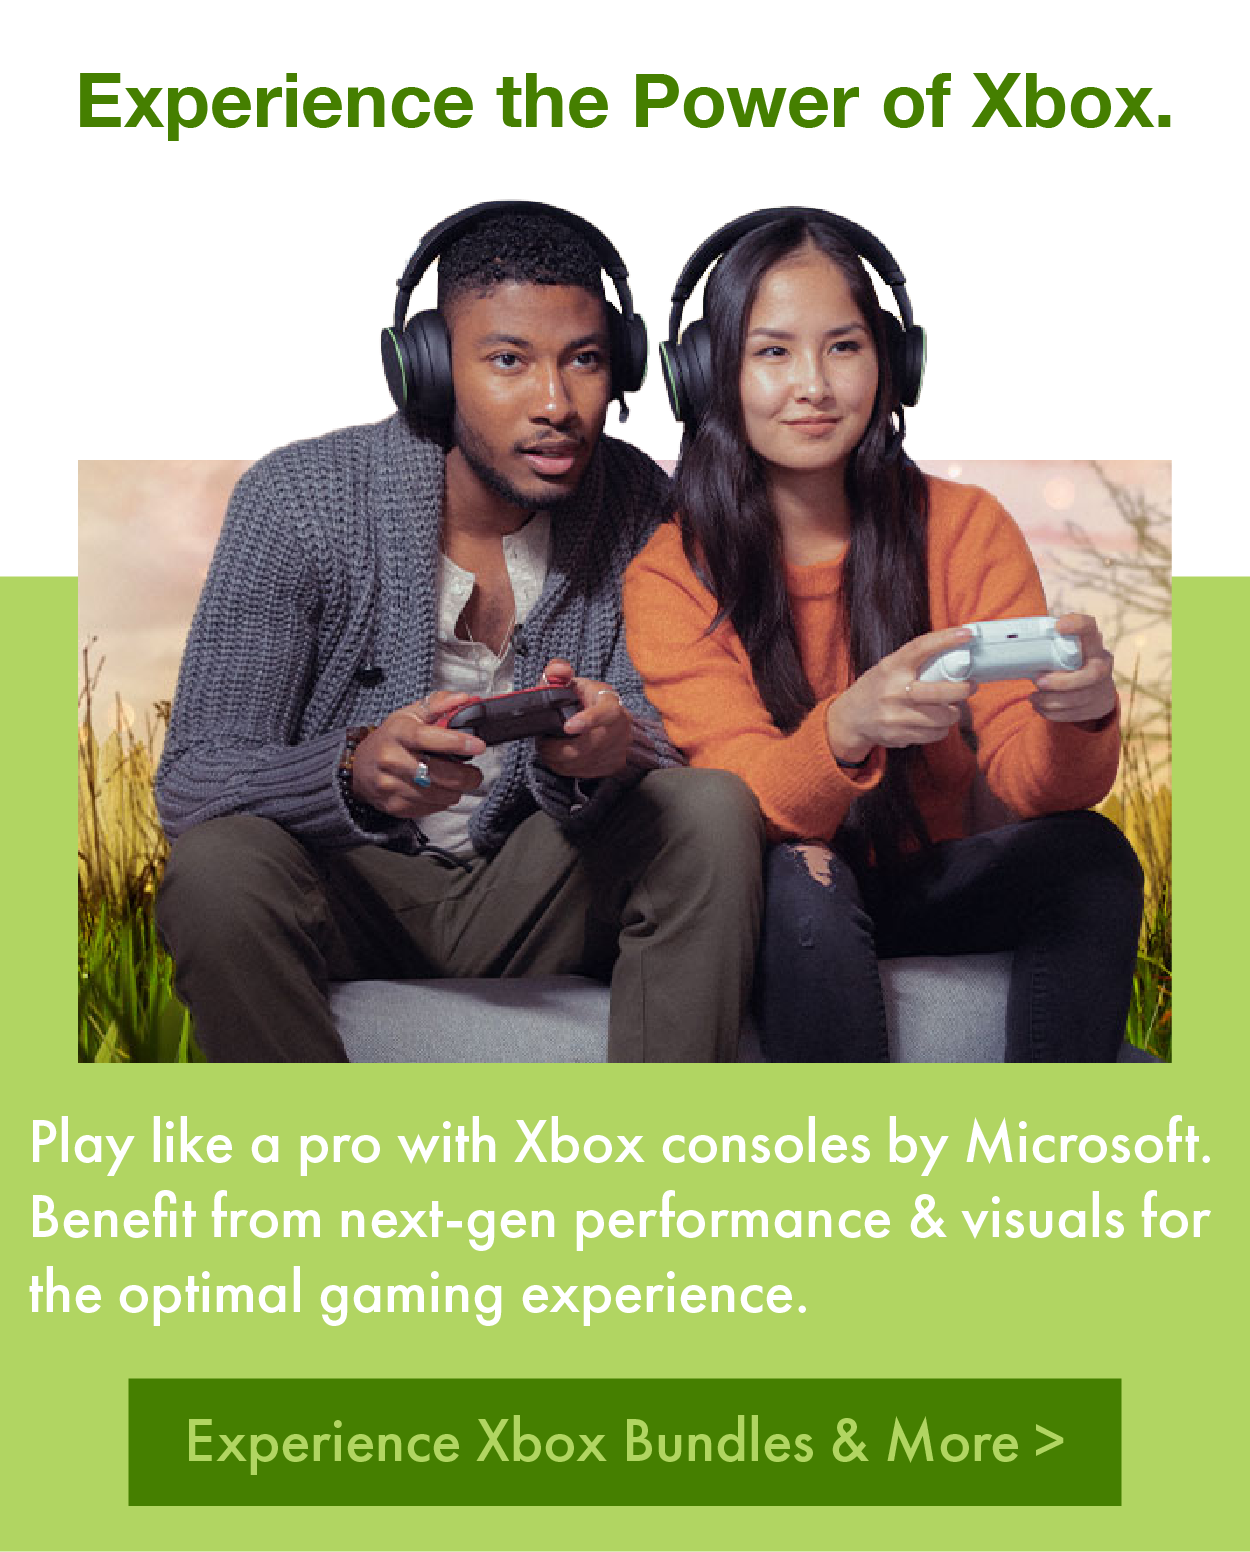 Experience the power of Xbox. Play like a pro with Xbox consoles by Microsoft. Benefit from next-gen performance & visuals for the optimal gaming experience.